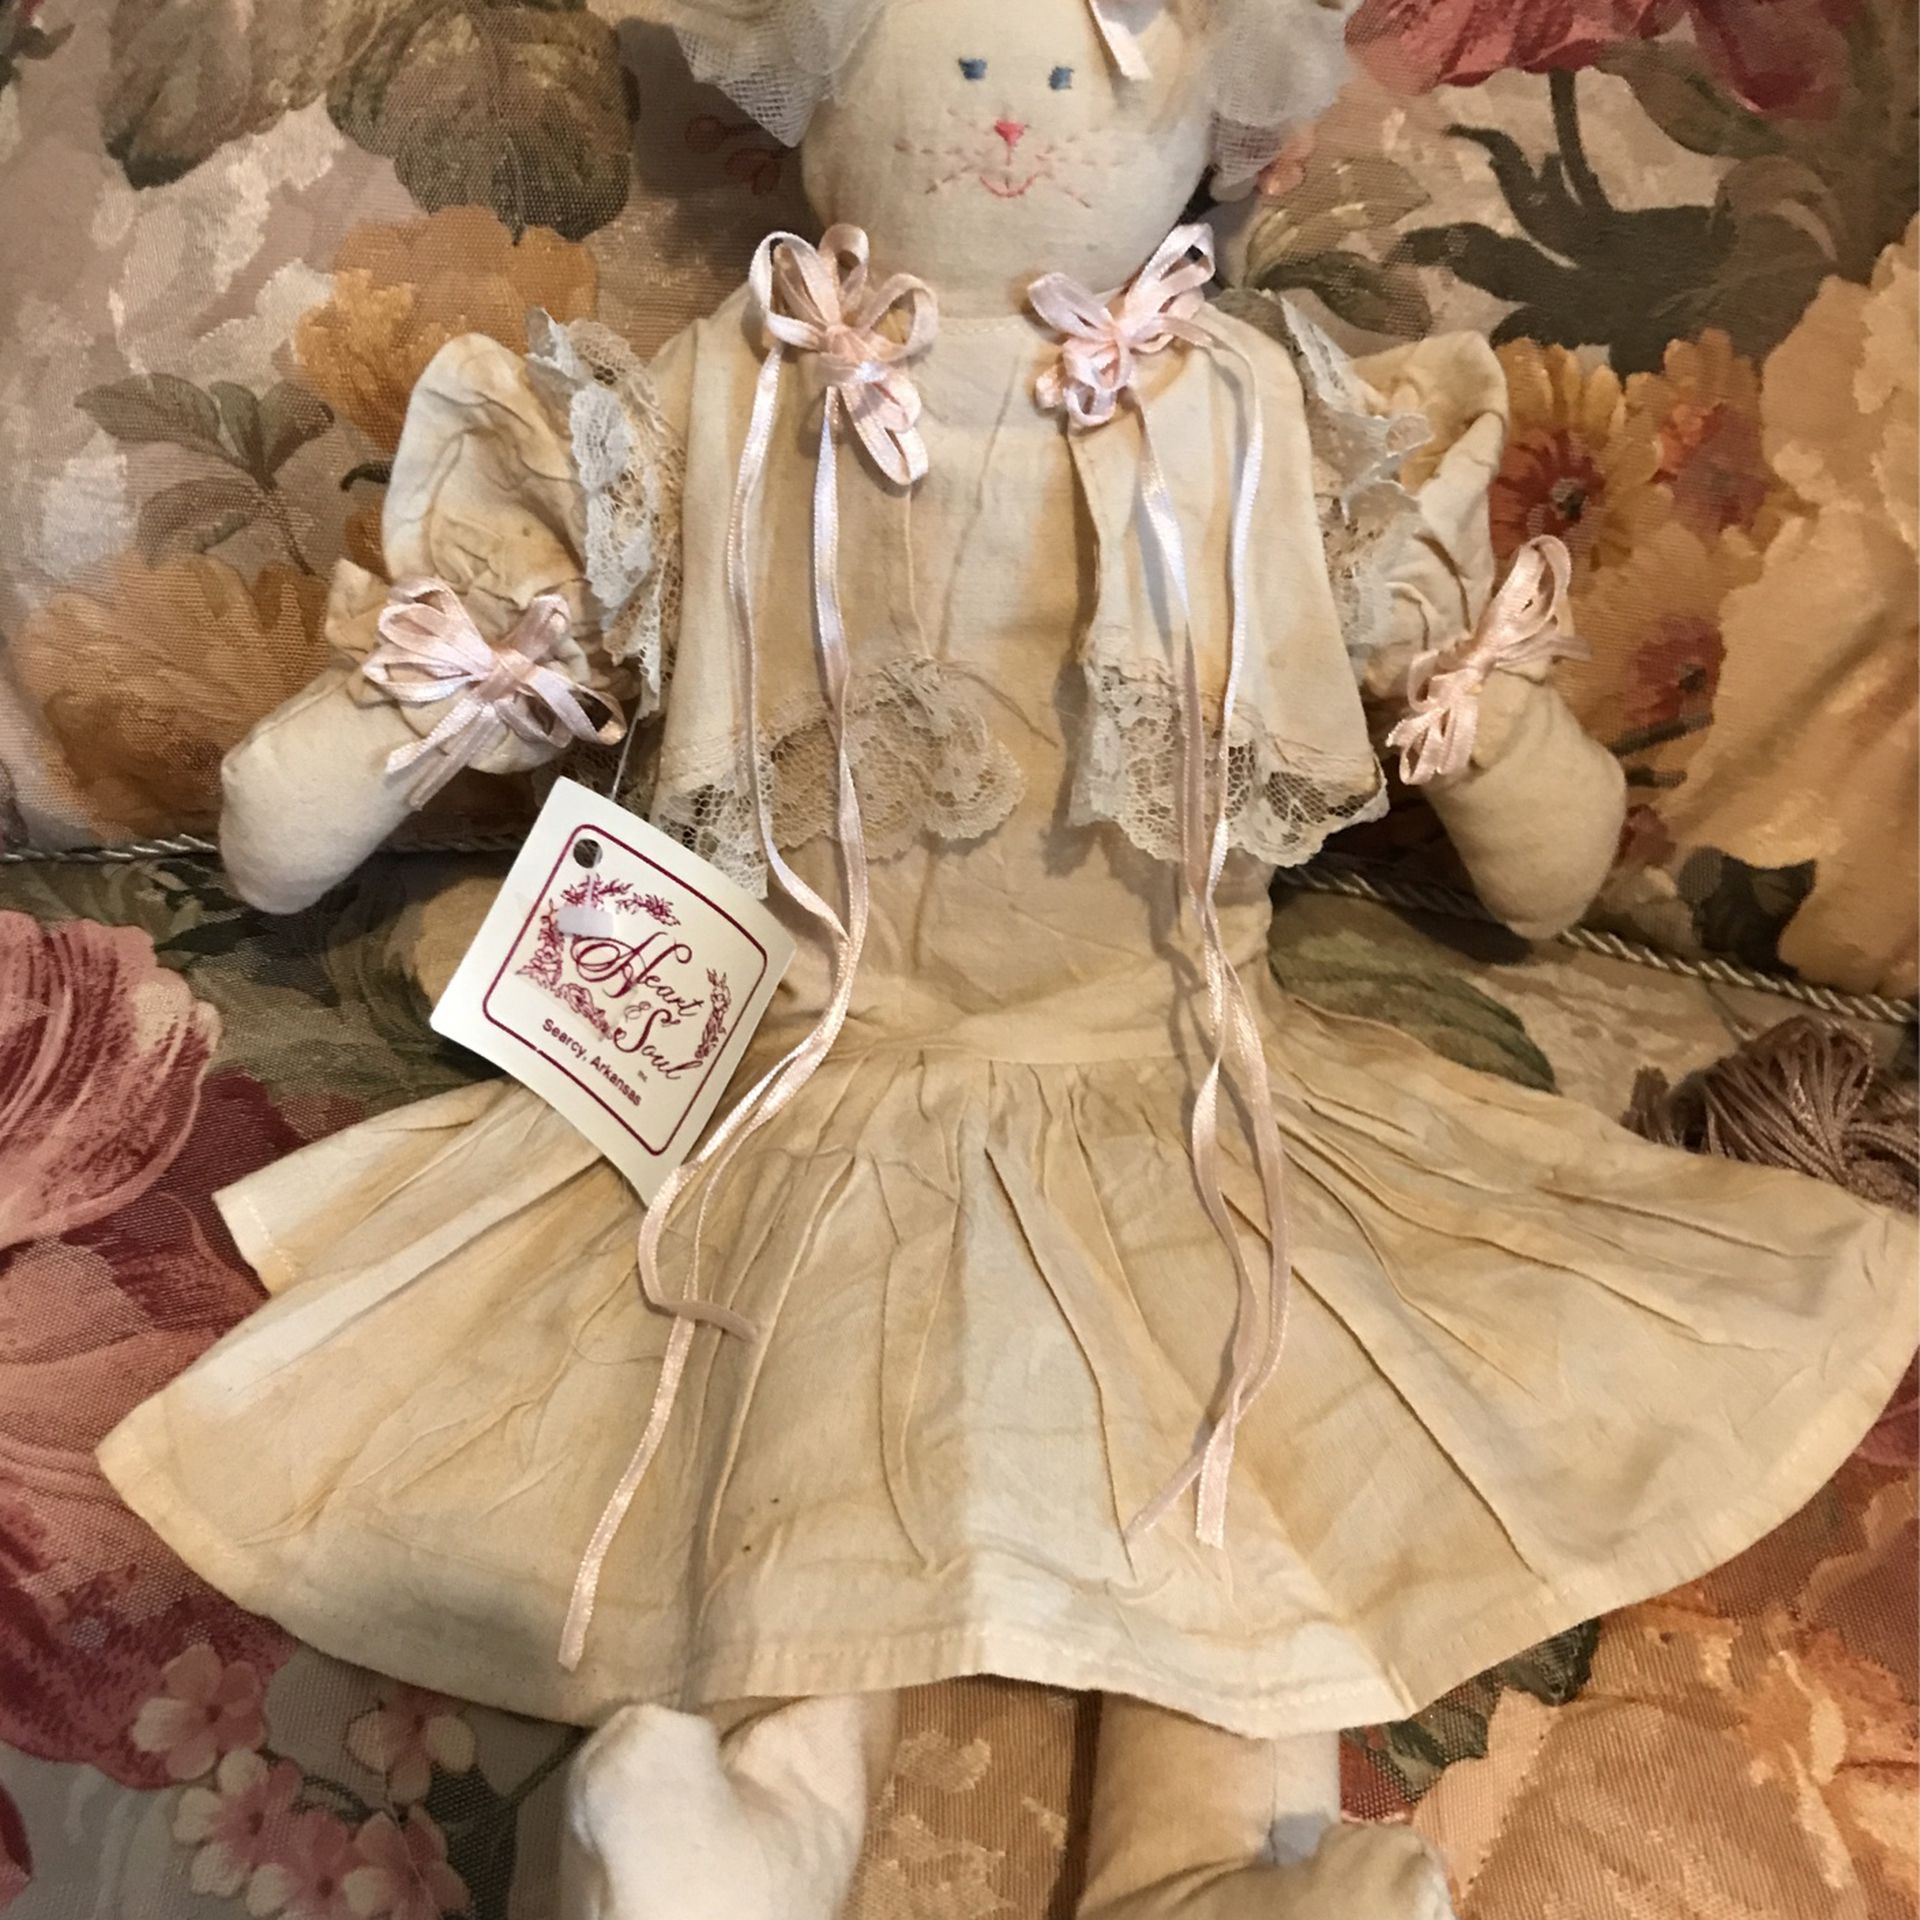 Sweet! Precious ! Adorable ! Soft Cotton Kitty Dressed Up In Cotton Dress & Lace !!!